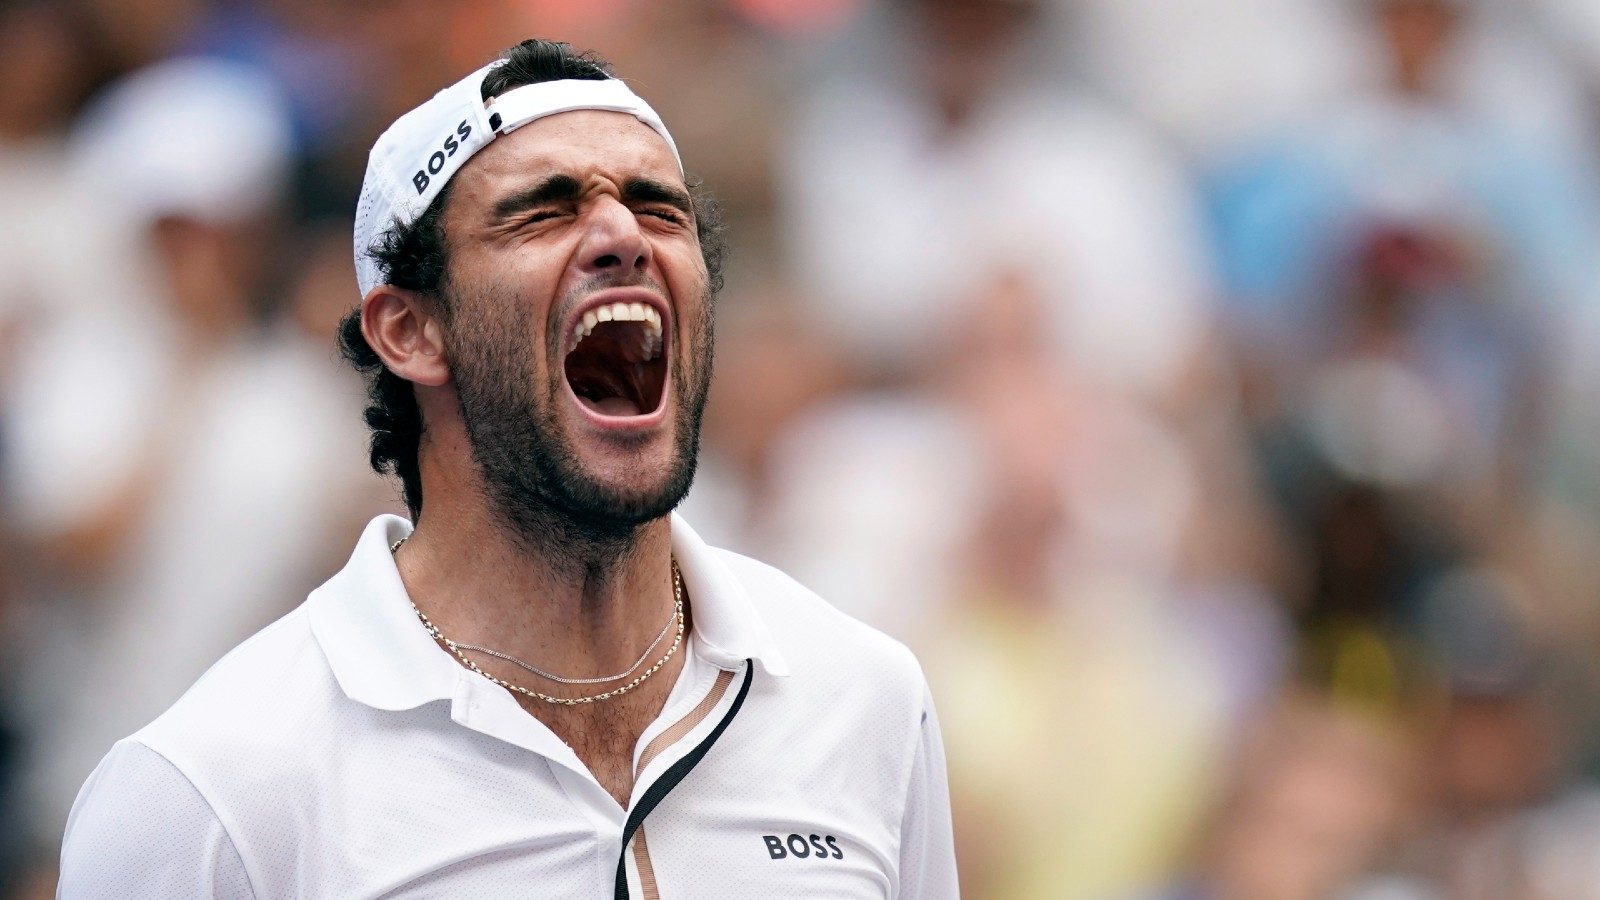 US Open 2022: Matteo Berrettini Moves Into Last Eight at Flushing Meadows